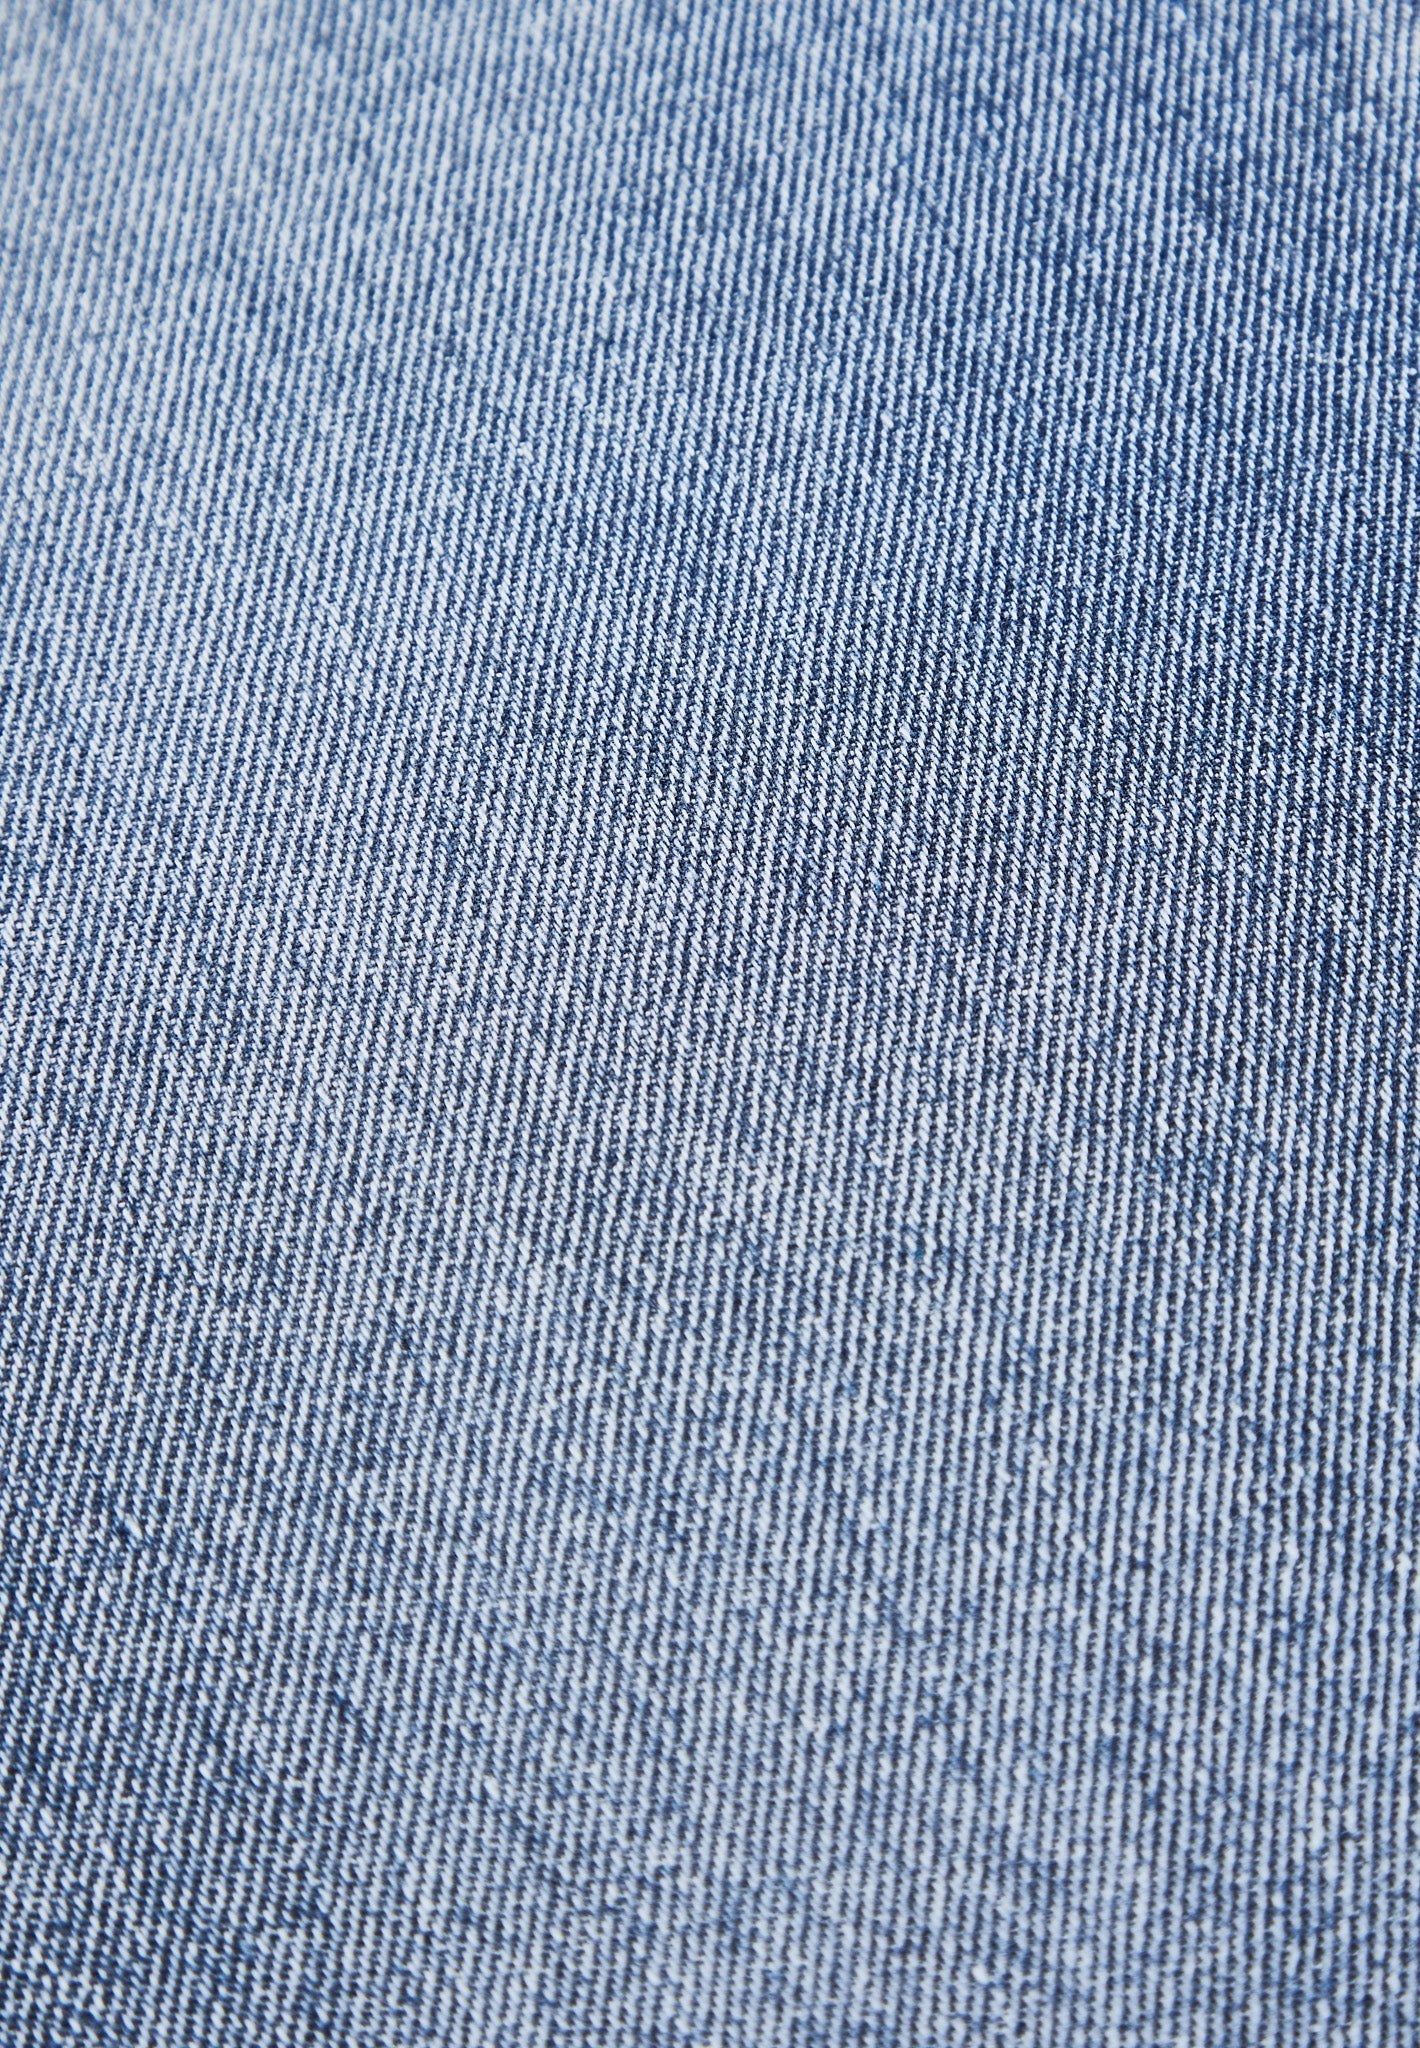 everyday-jeans-washed-blue